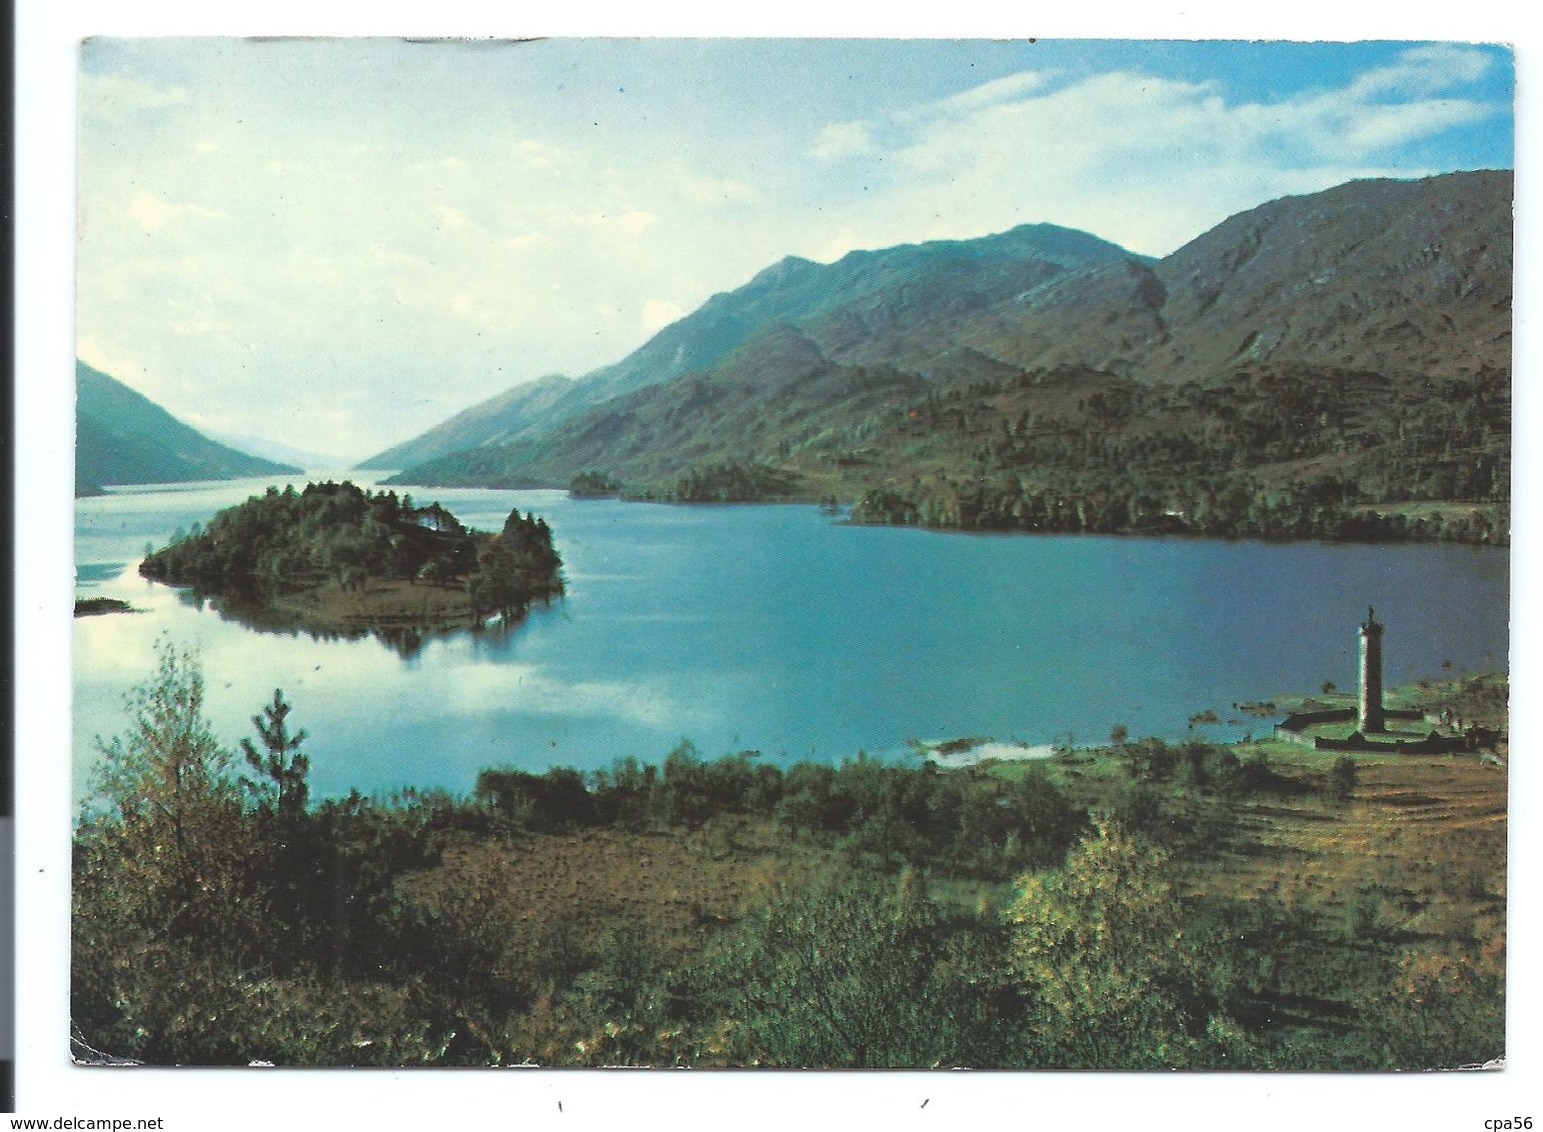 LOCH SHIEL And GLENFINNAN MONUMENT - Inverness-shire